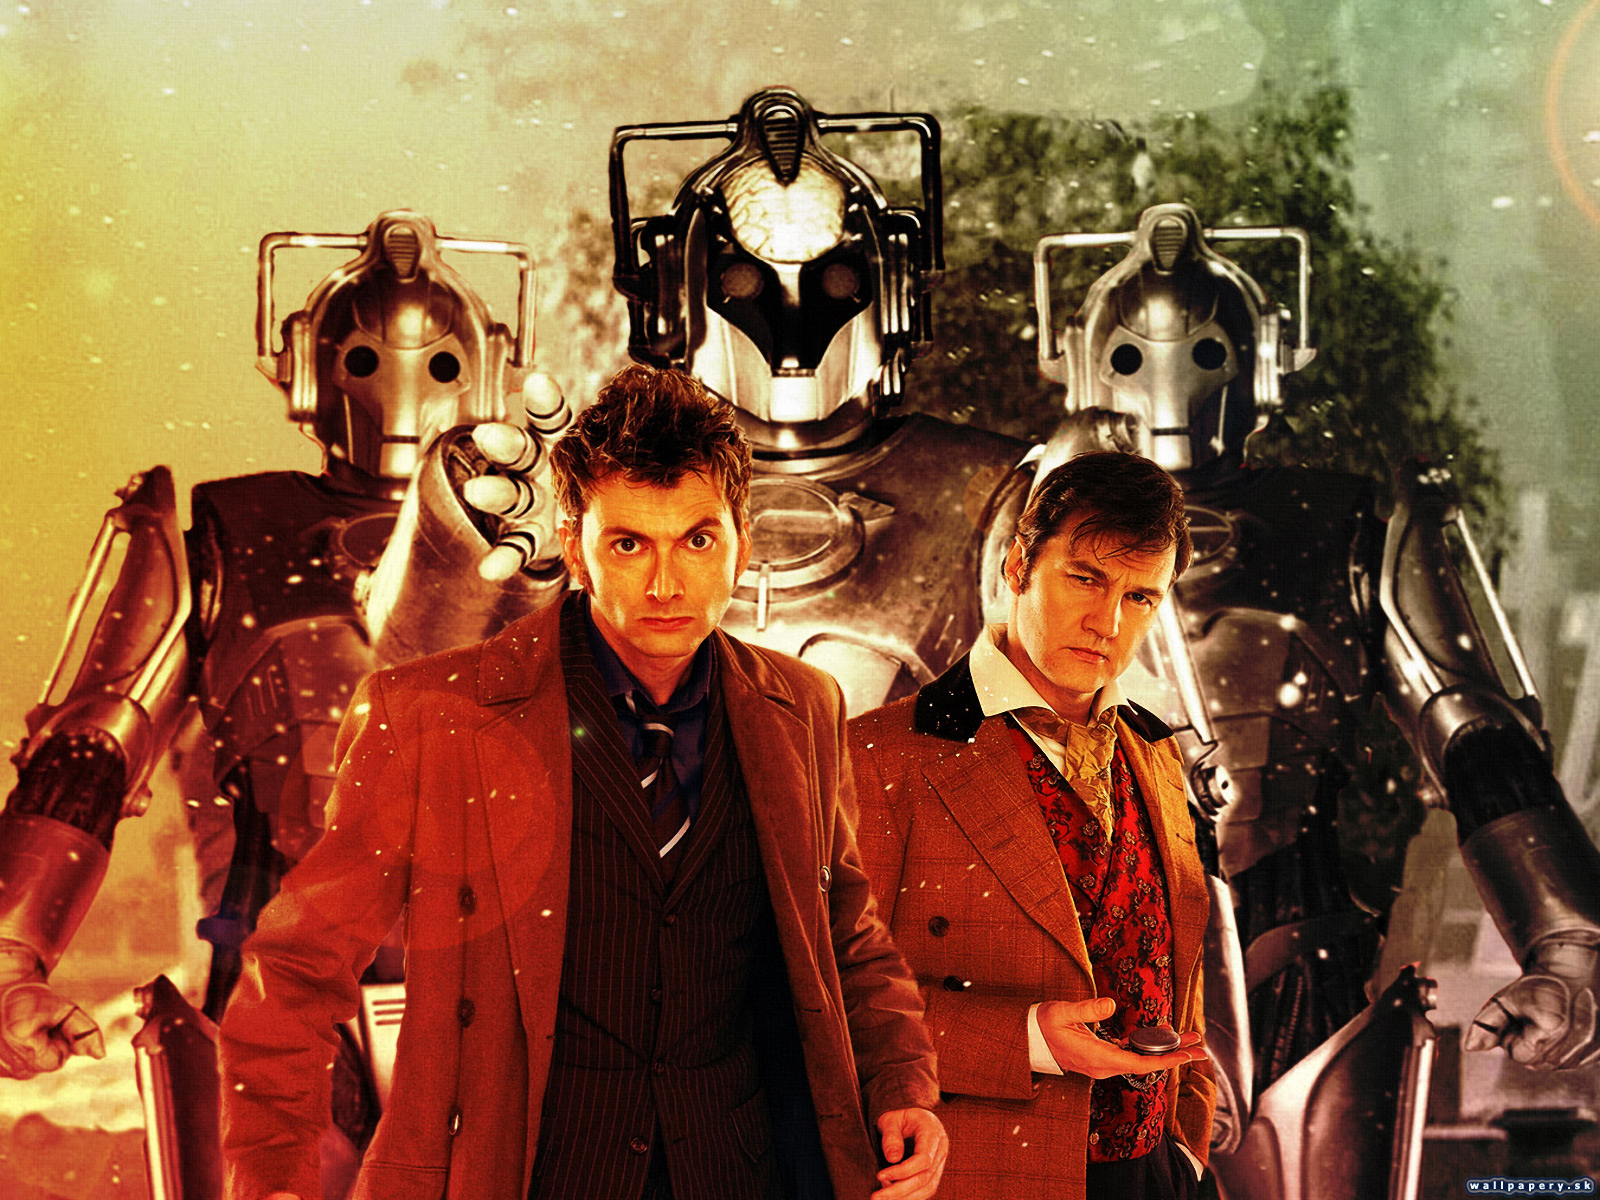 Doctor Who: The Adventure Games - Blood of the Cybermen - wallpaper 13